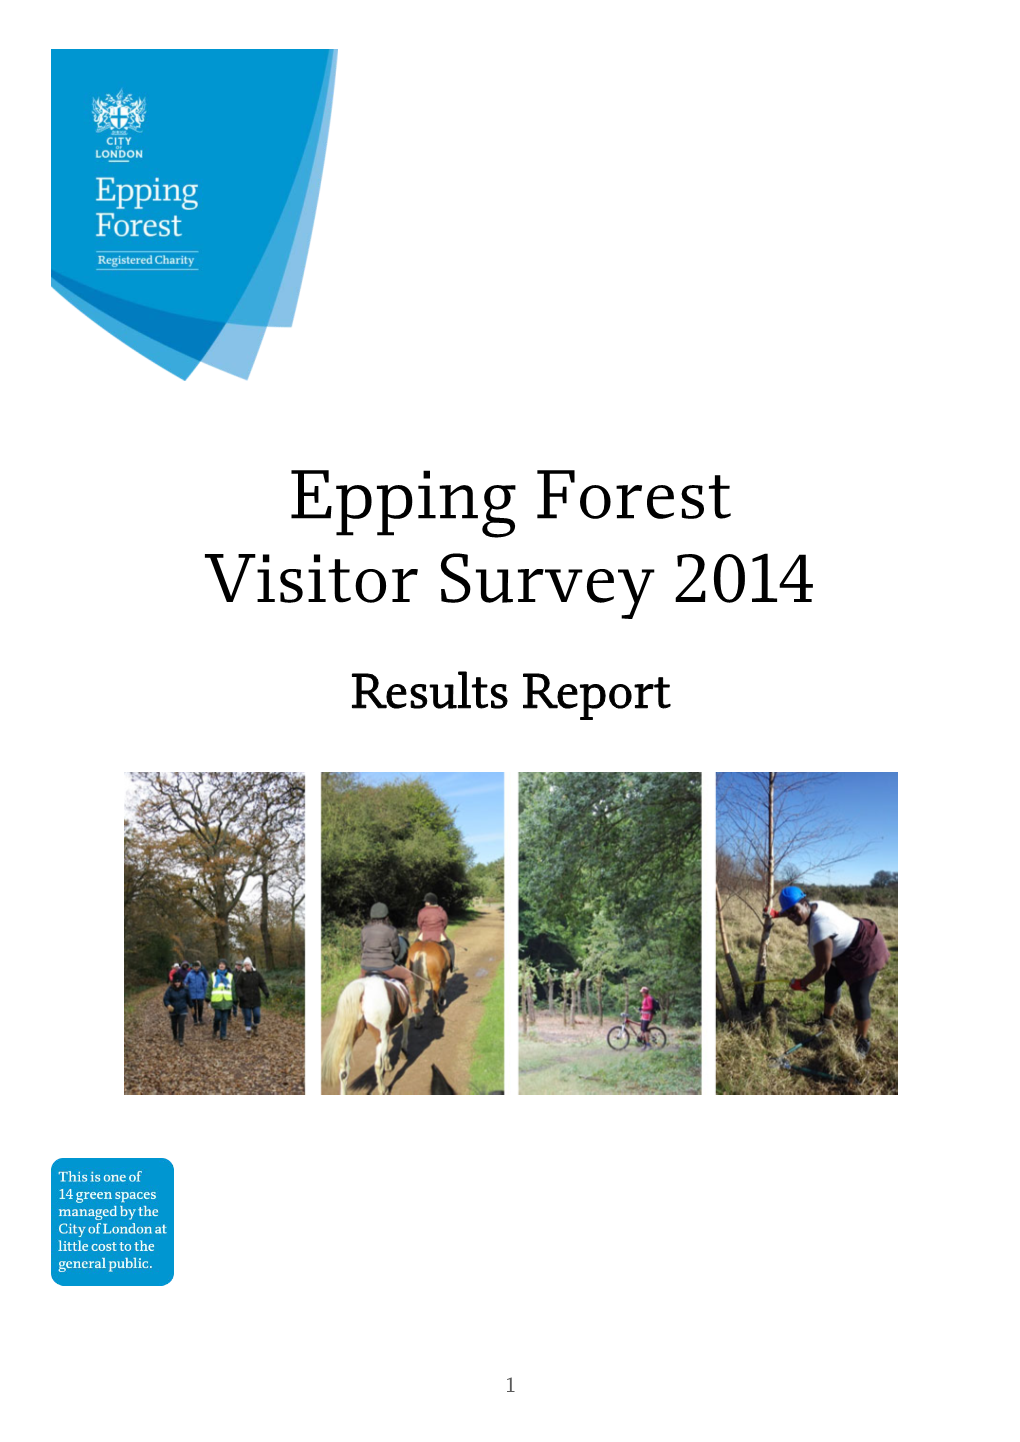 Visitor Survey Report 2014